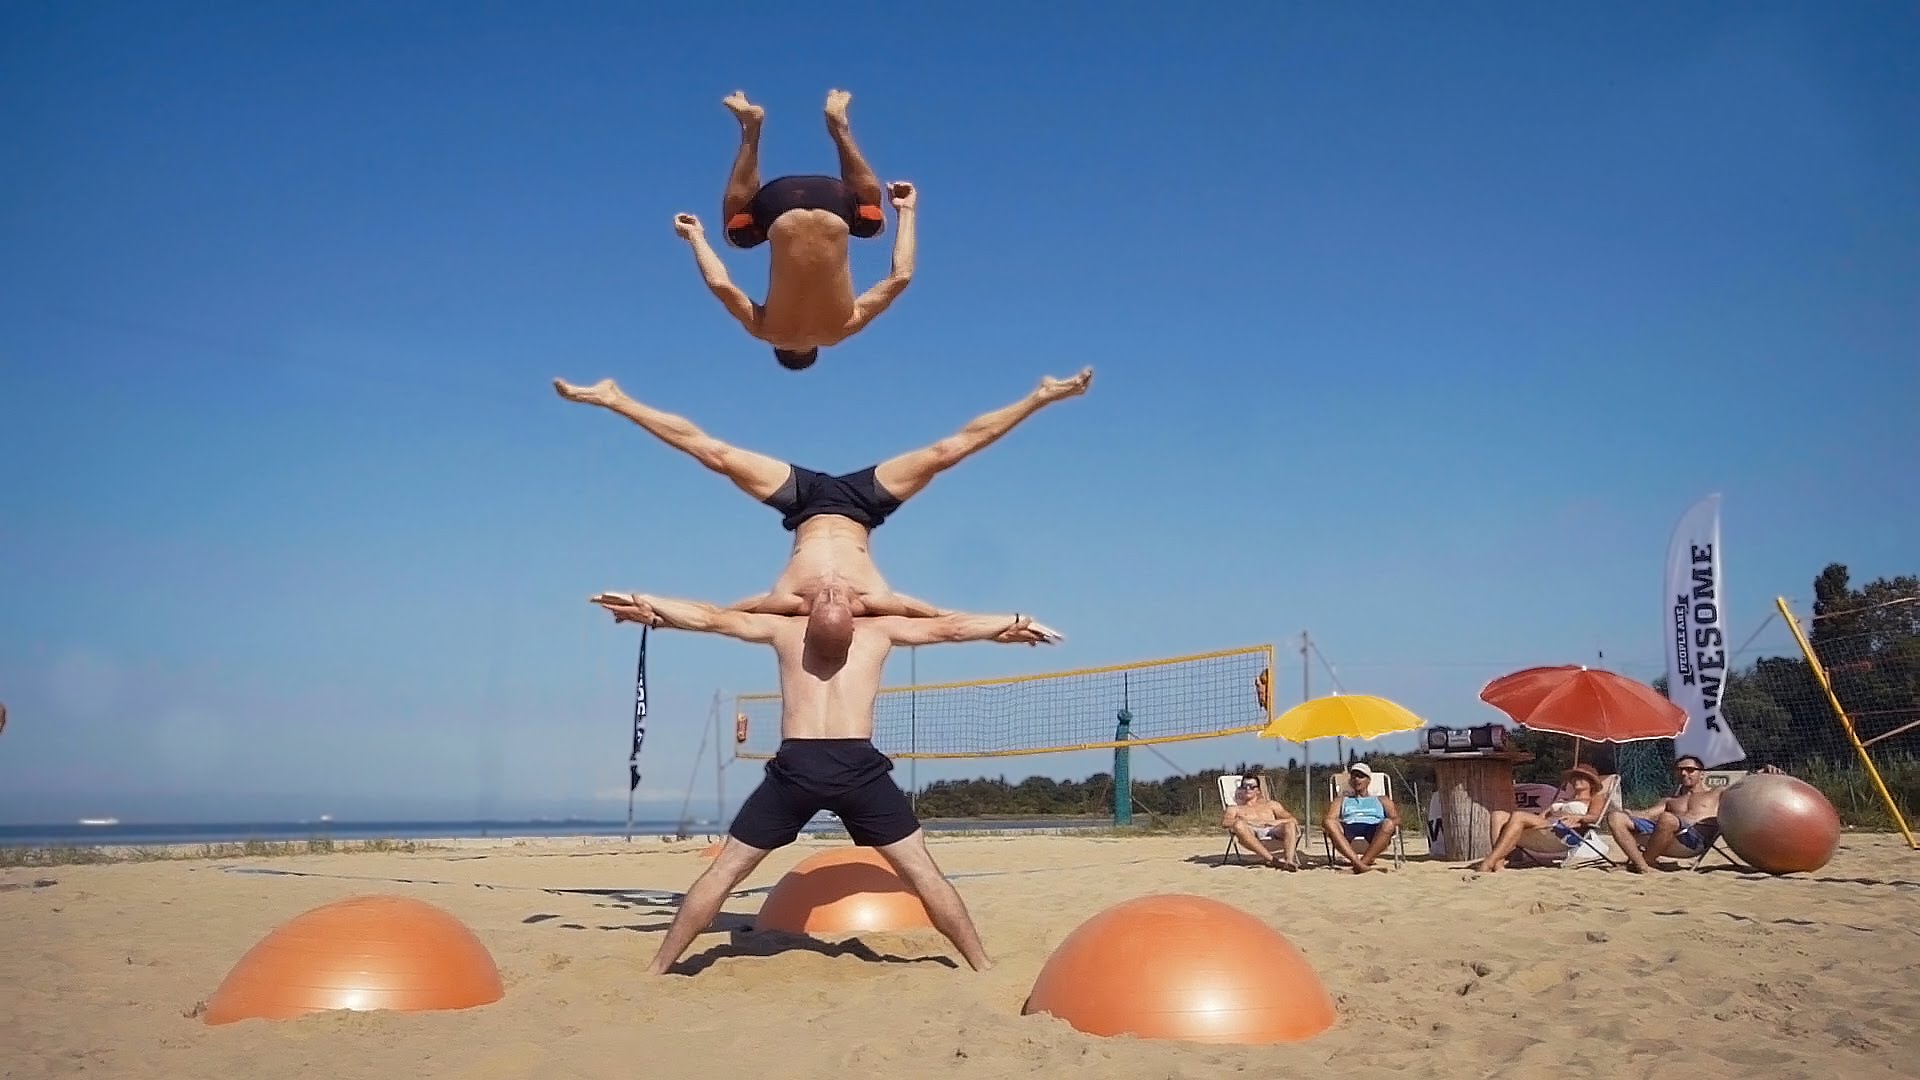 Yoga Ball Tricks and Flips at the Beach | Daredevils - YouTube